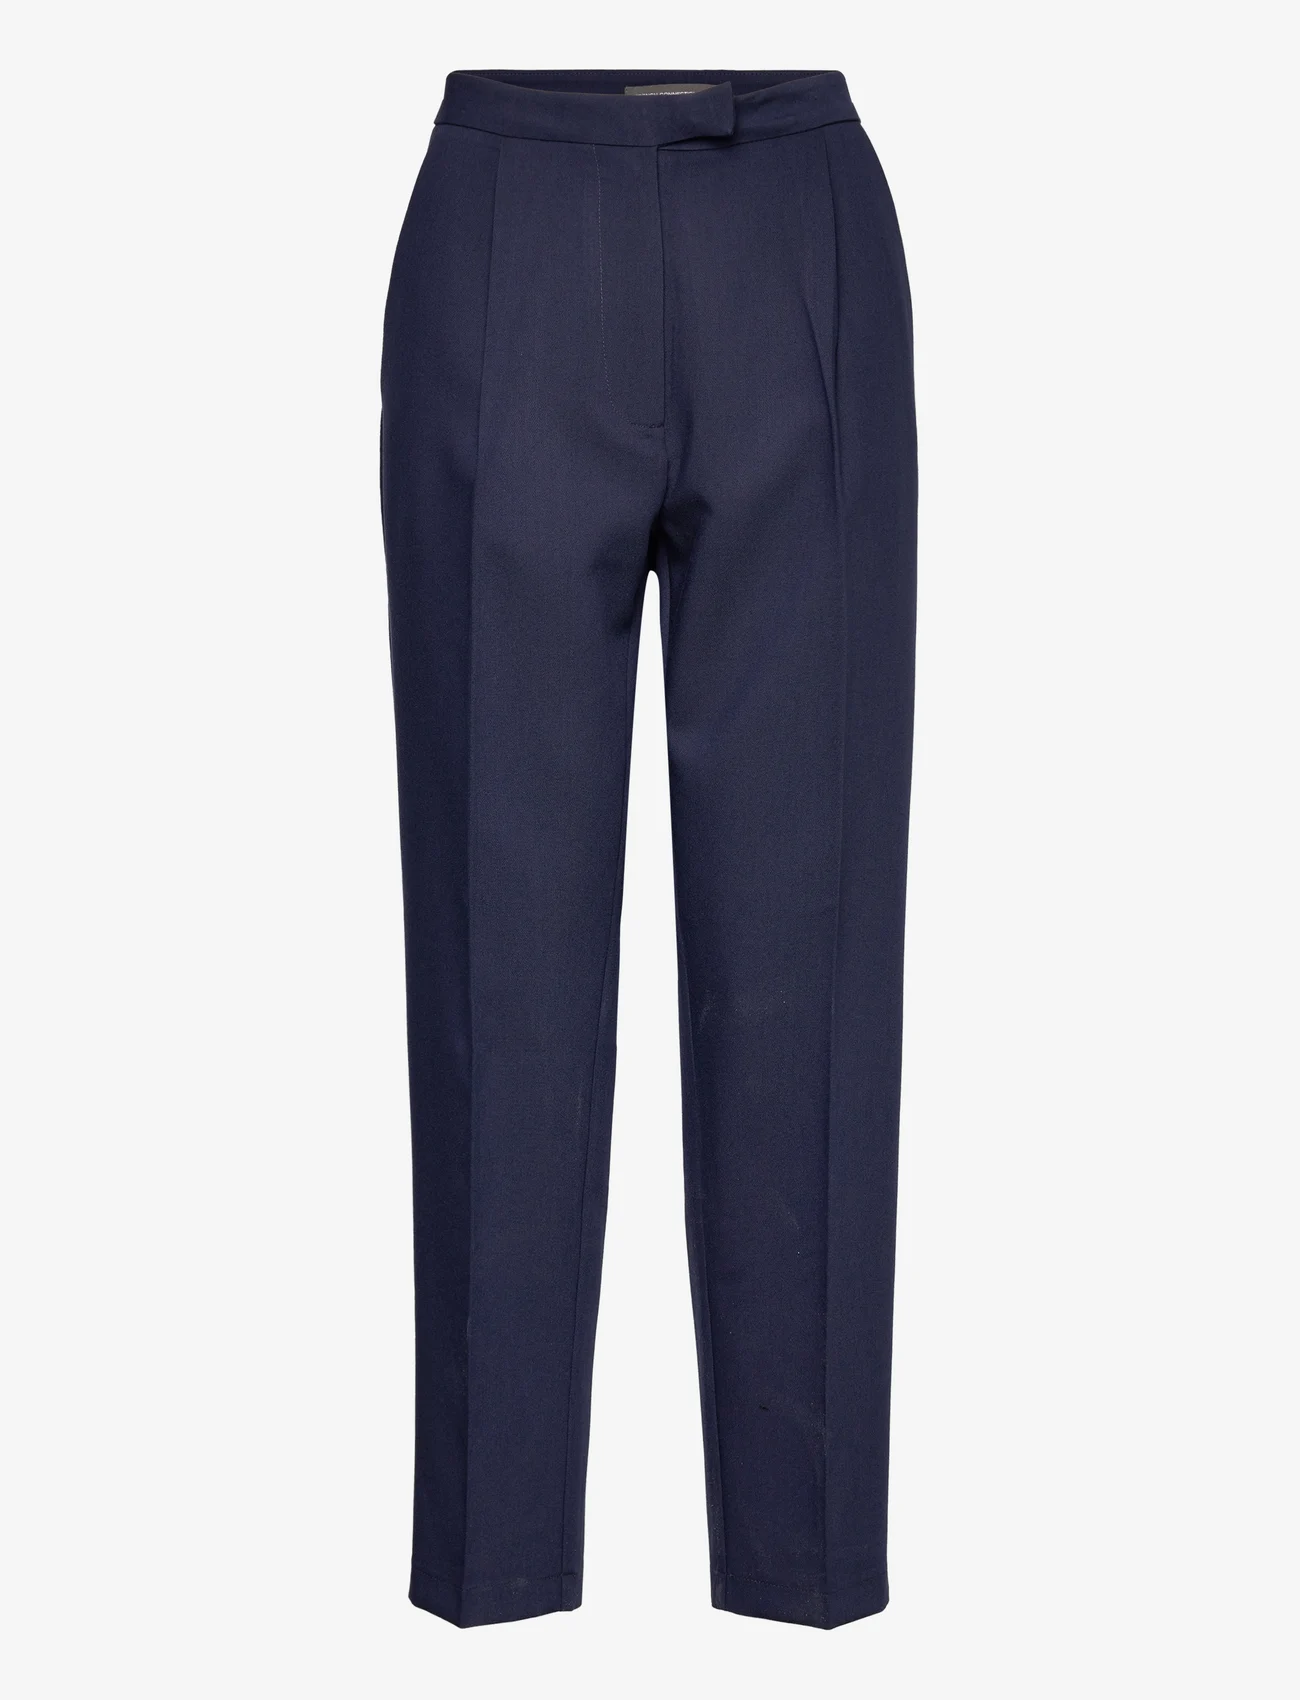 French Connection - LUX-PLEAT - tailored trousers - dark navy - 0